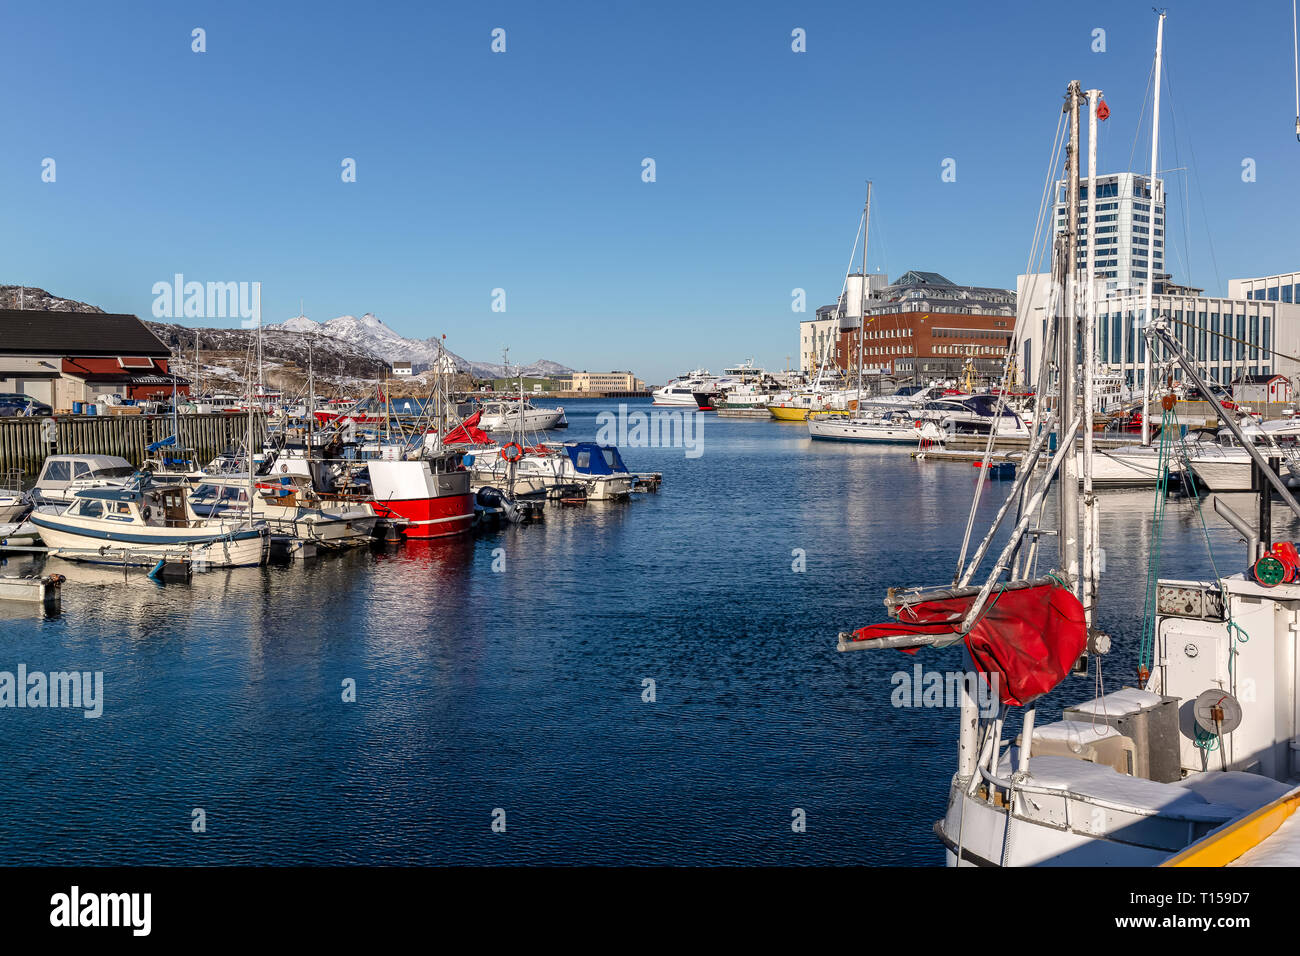 The port town of Bodo in Norway, showing many small boats anchored in the harbour. Stock Photo